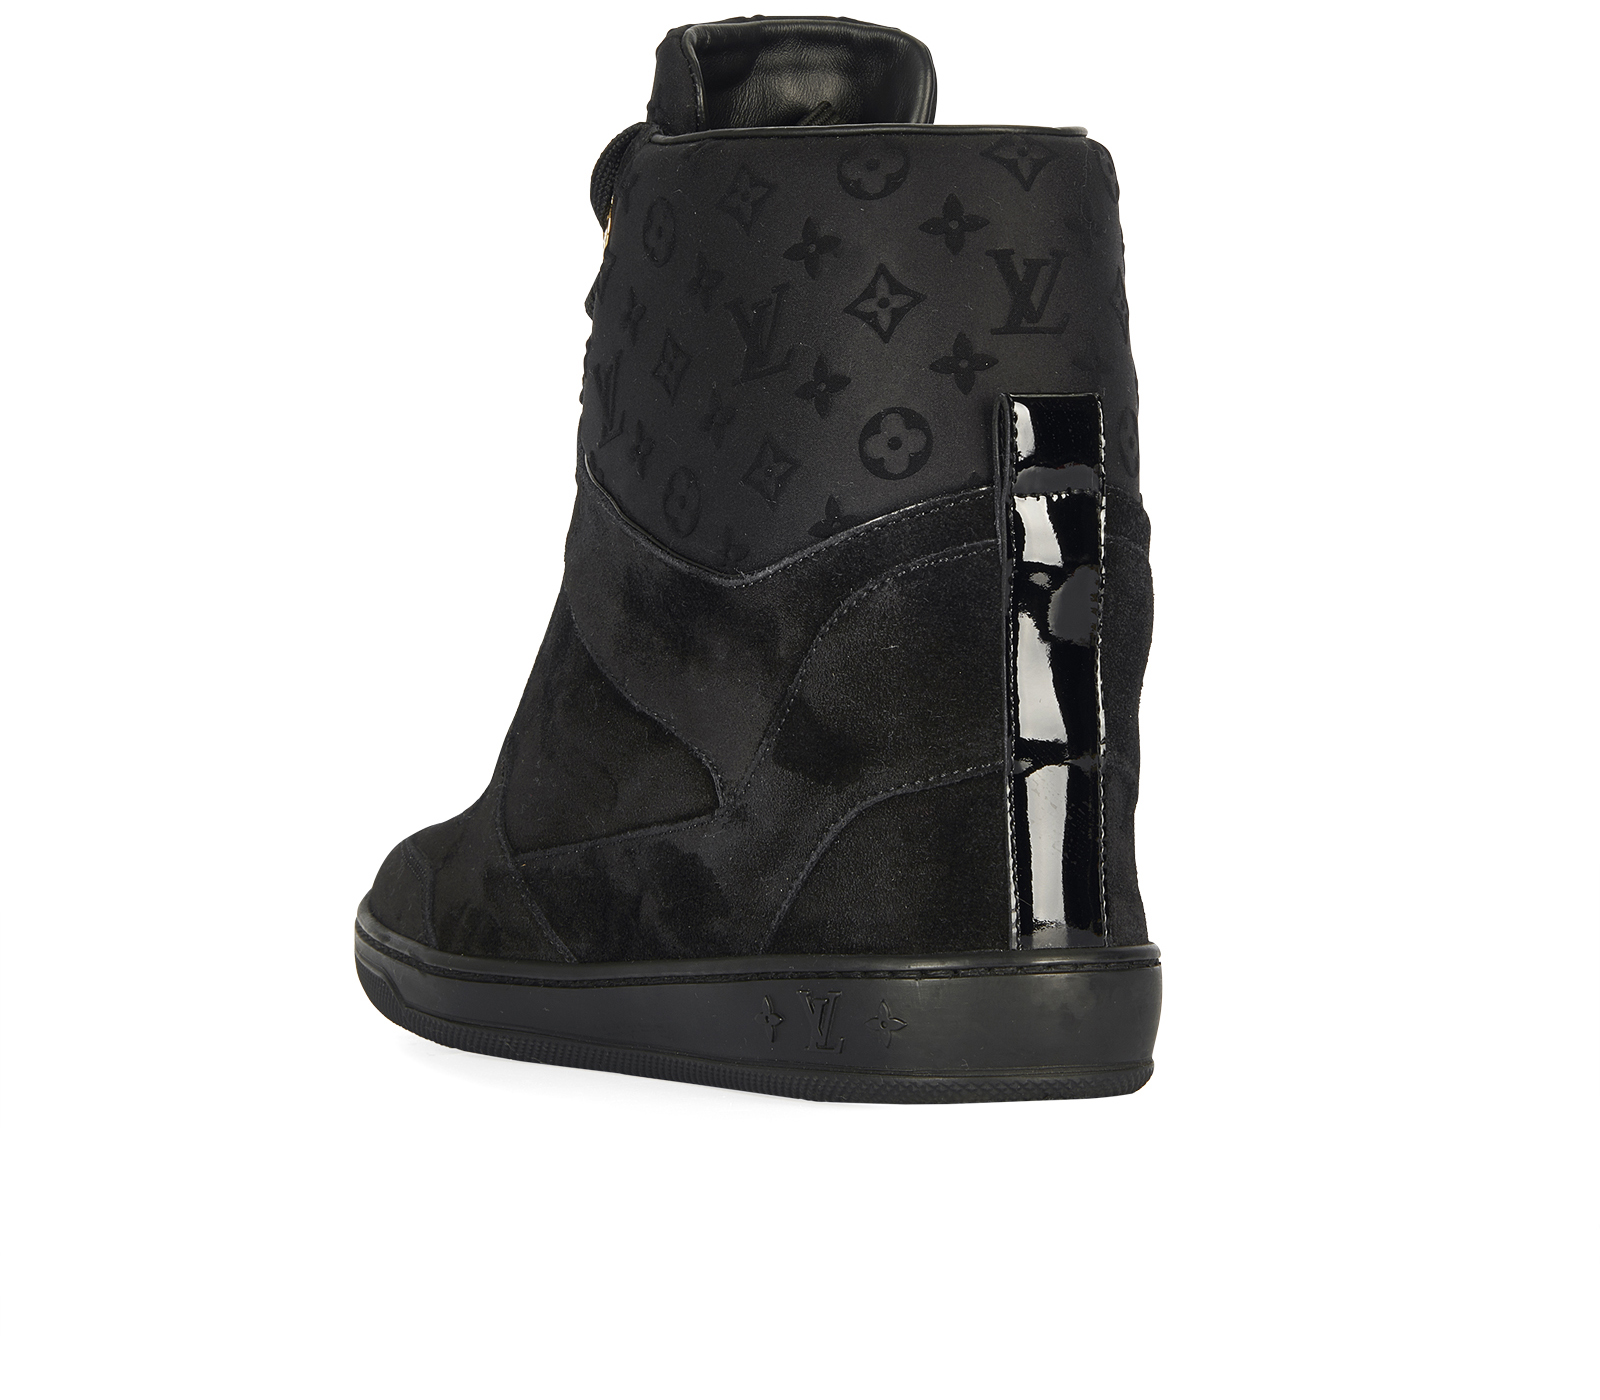 Louis Vuitton Black Suede And Embossed Monogram Fabric Millenium Wedge  Sneakers Size 37.5 Louis Vuitton